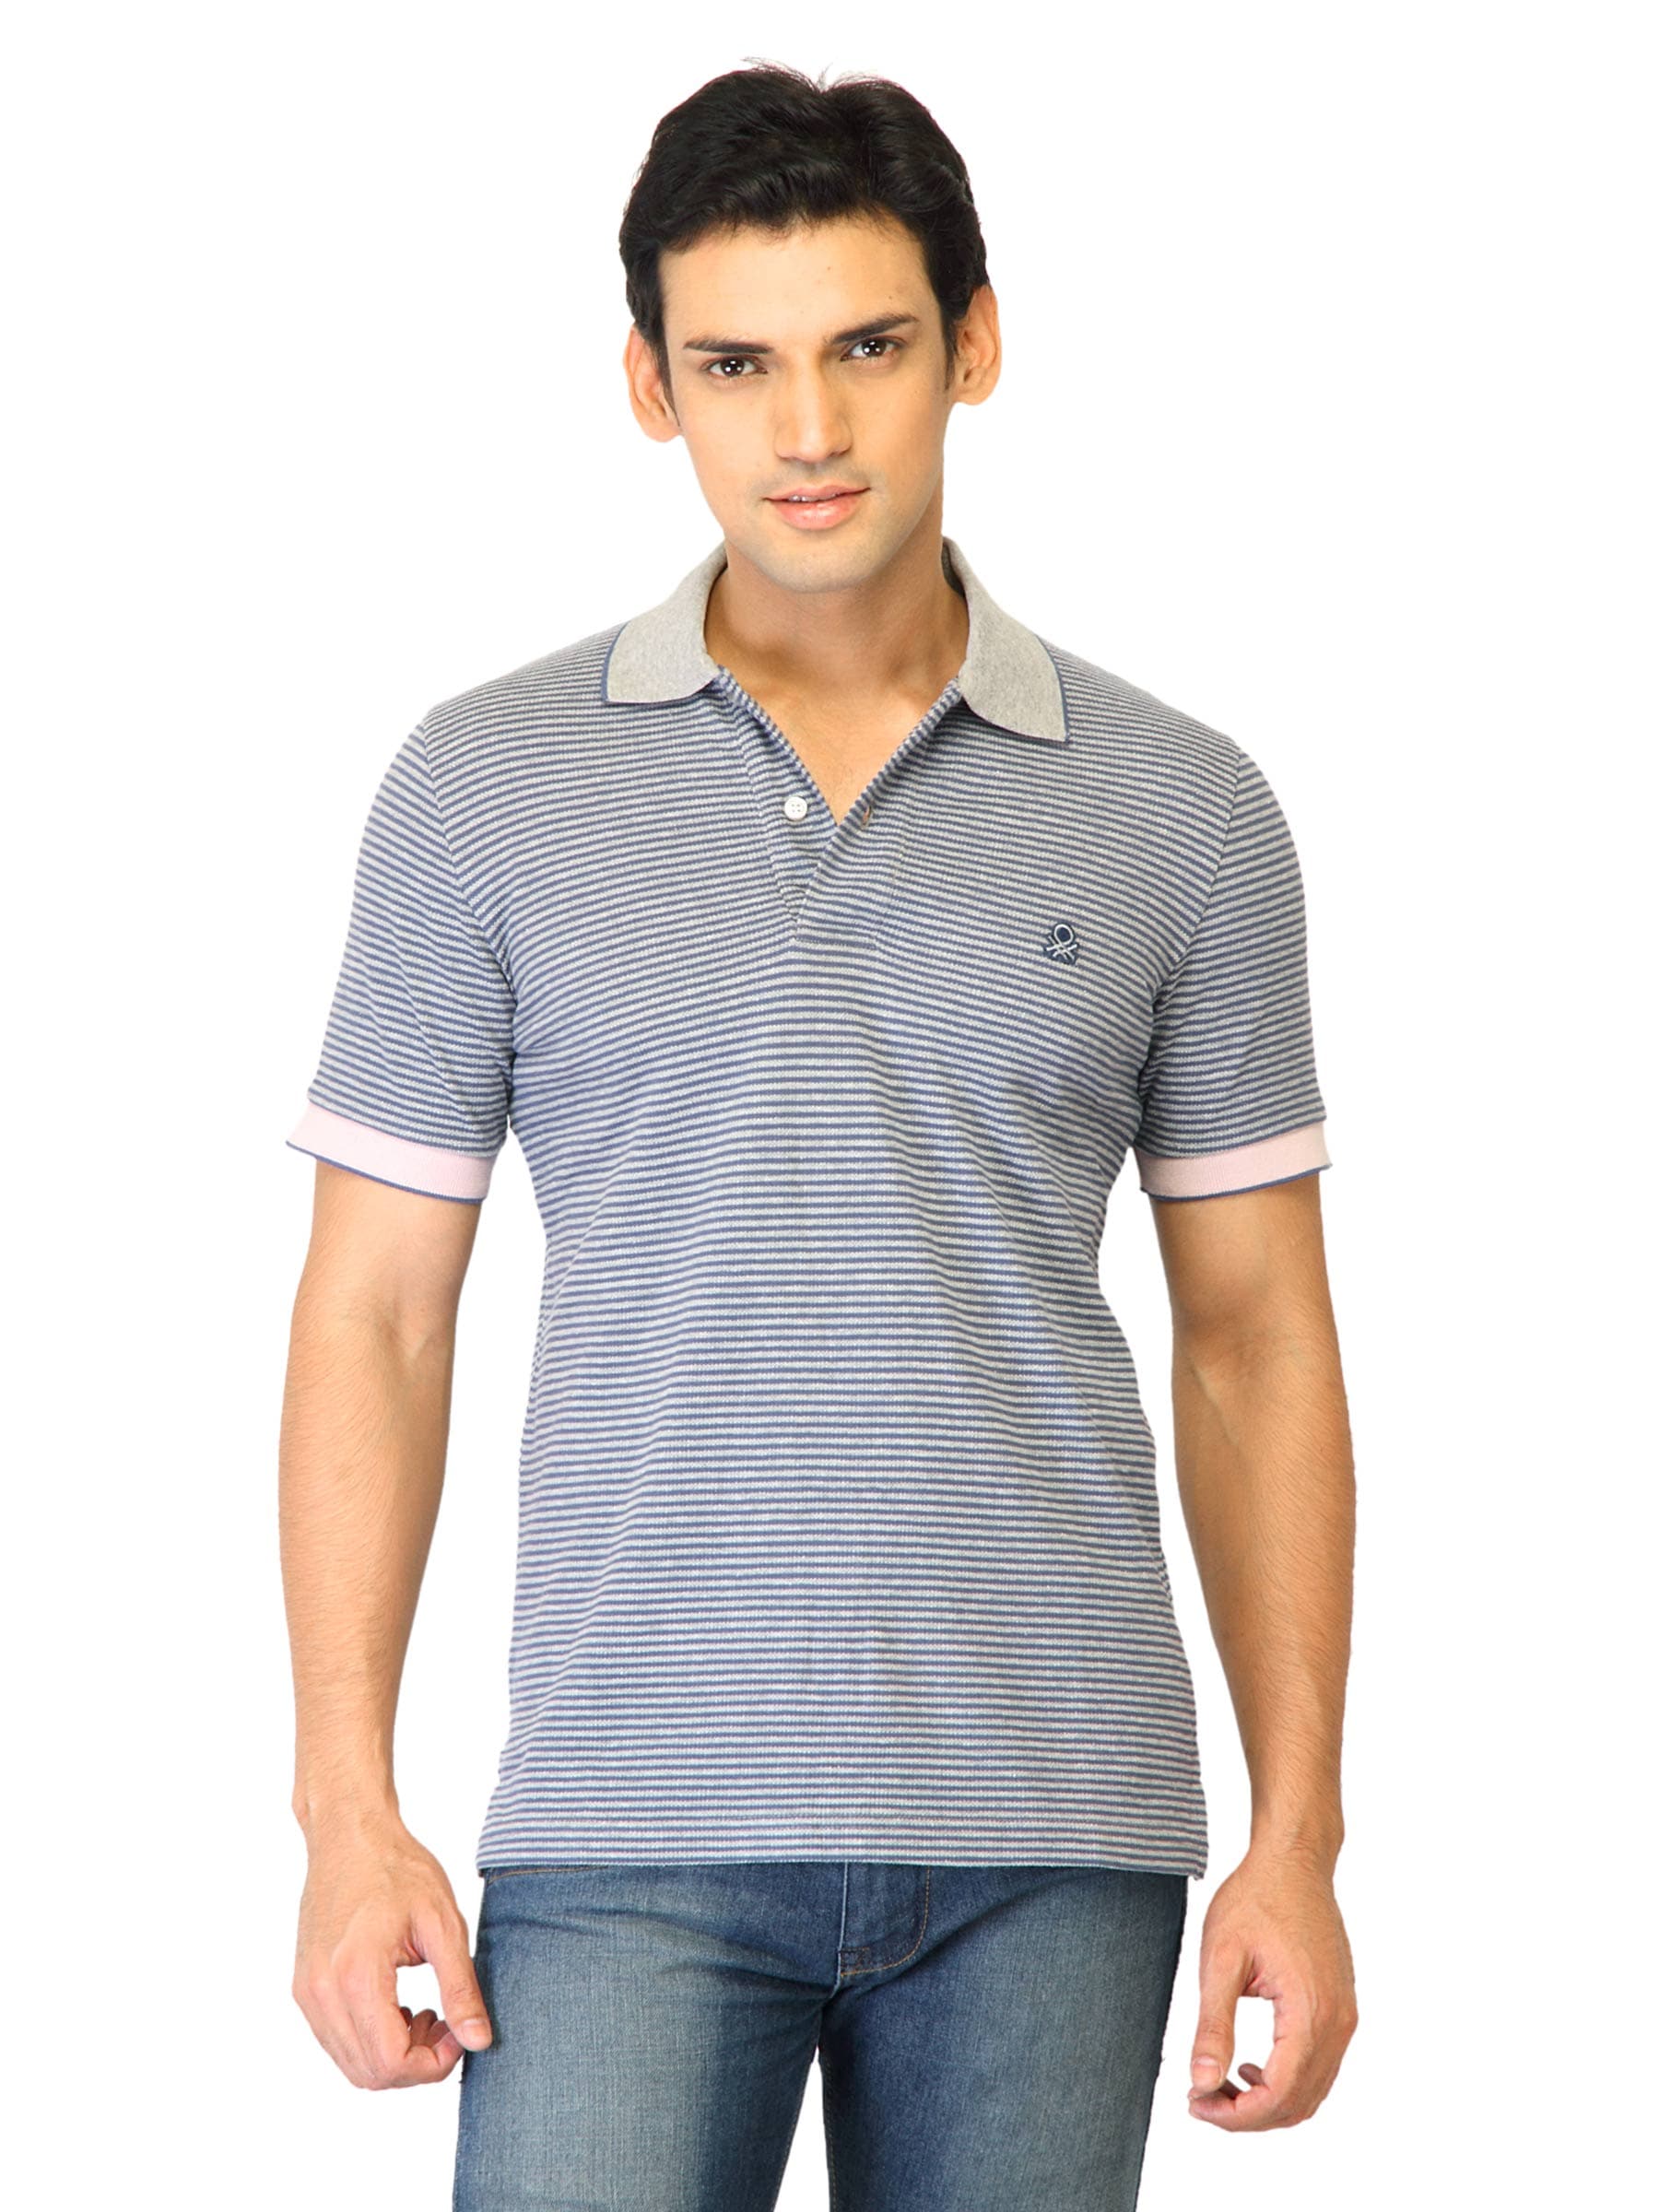 United Colors of Benetton Men Stripes Grey Polo T-shirts